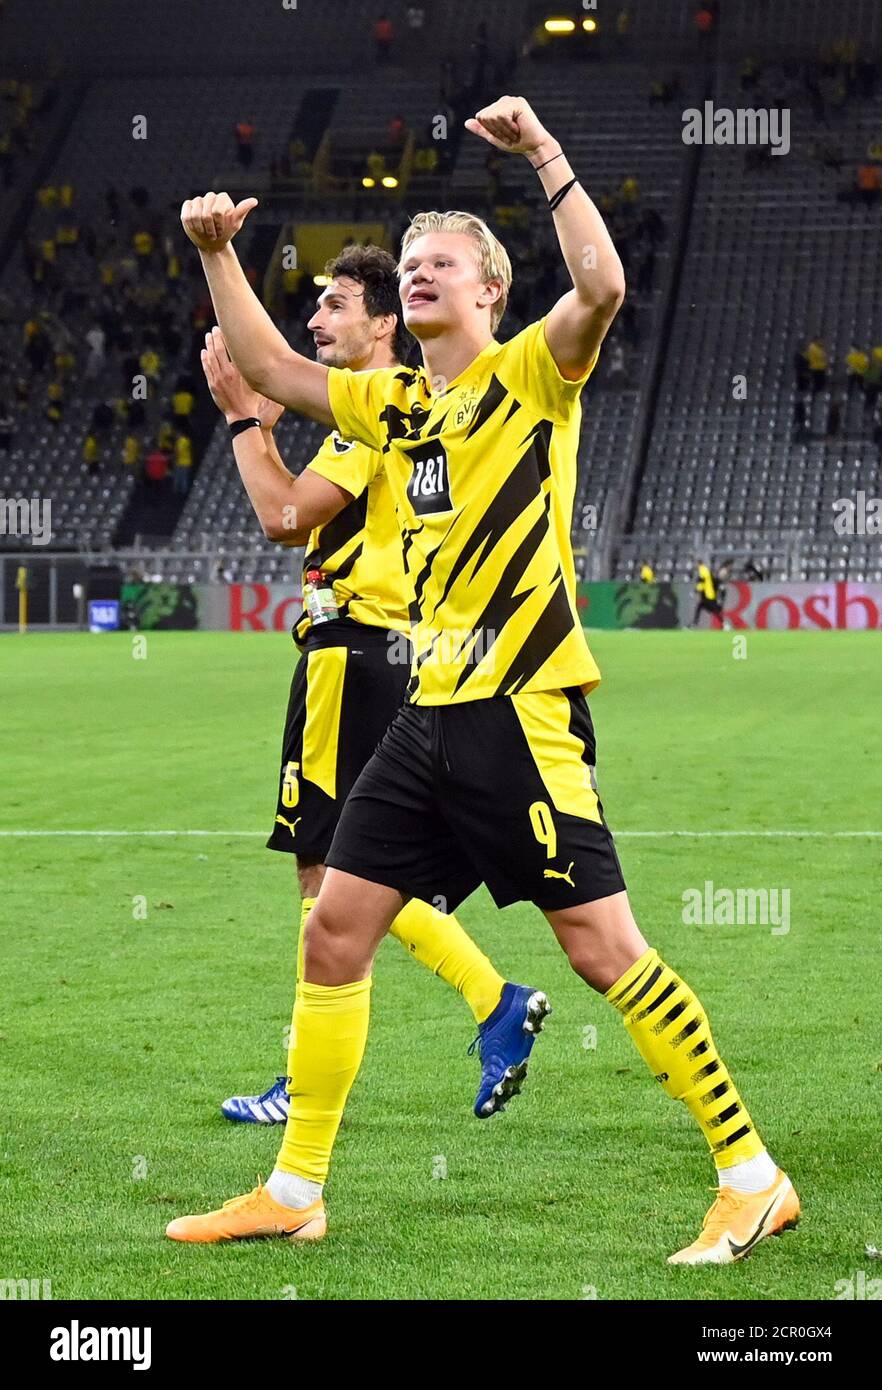 Dortmund, Germany. 19th Sep, 2020. Football: Bundesliga, Borussia Dortmund - Borussia Mönchengladbach, 1st matchday at Signal Iduna Park. Dortmund's Erling Haaland thanks the fans after the end of the game. IMPORTANT NOTE: According to the regulations of the DFL Deutsche Fußball Liga and the DFB Deutscher Fußball-Bund, it is prohibited to use or have used in the stadium and/or from the game taken photos in the form of sequence pictures and/or video-like photo series. Credit: Bernd Thissen/dpa/Alamy Live News Stock Photo